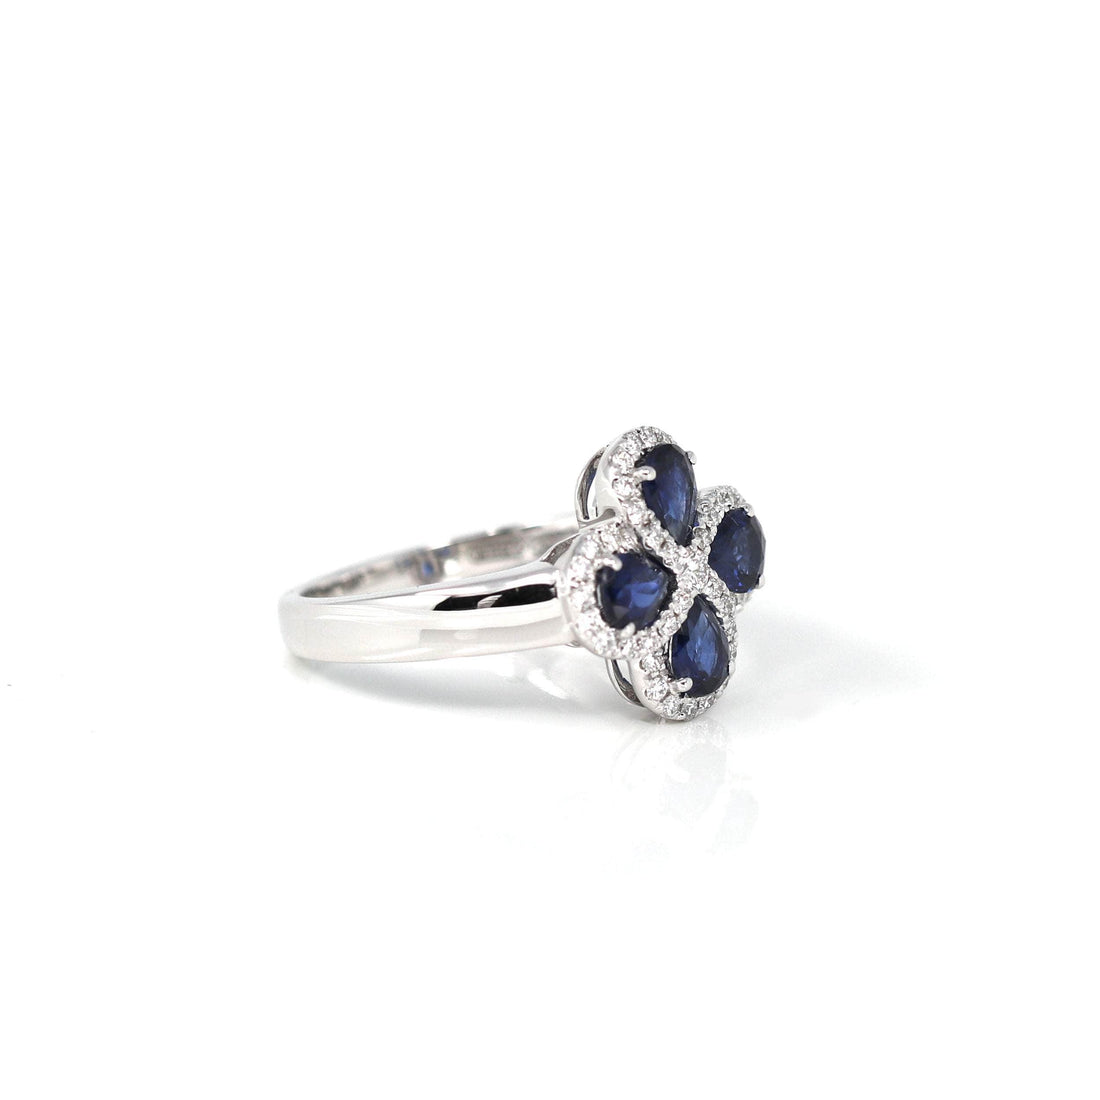 Baikalla Jewelry Gold Sapphire Ring 18k White Gold Natural Four Tear Drop Blue Sapphire Ring with Diamonds